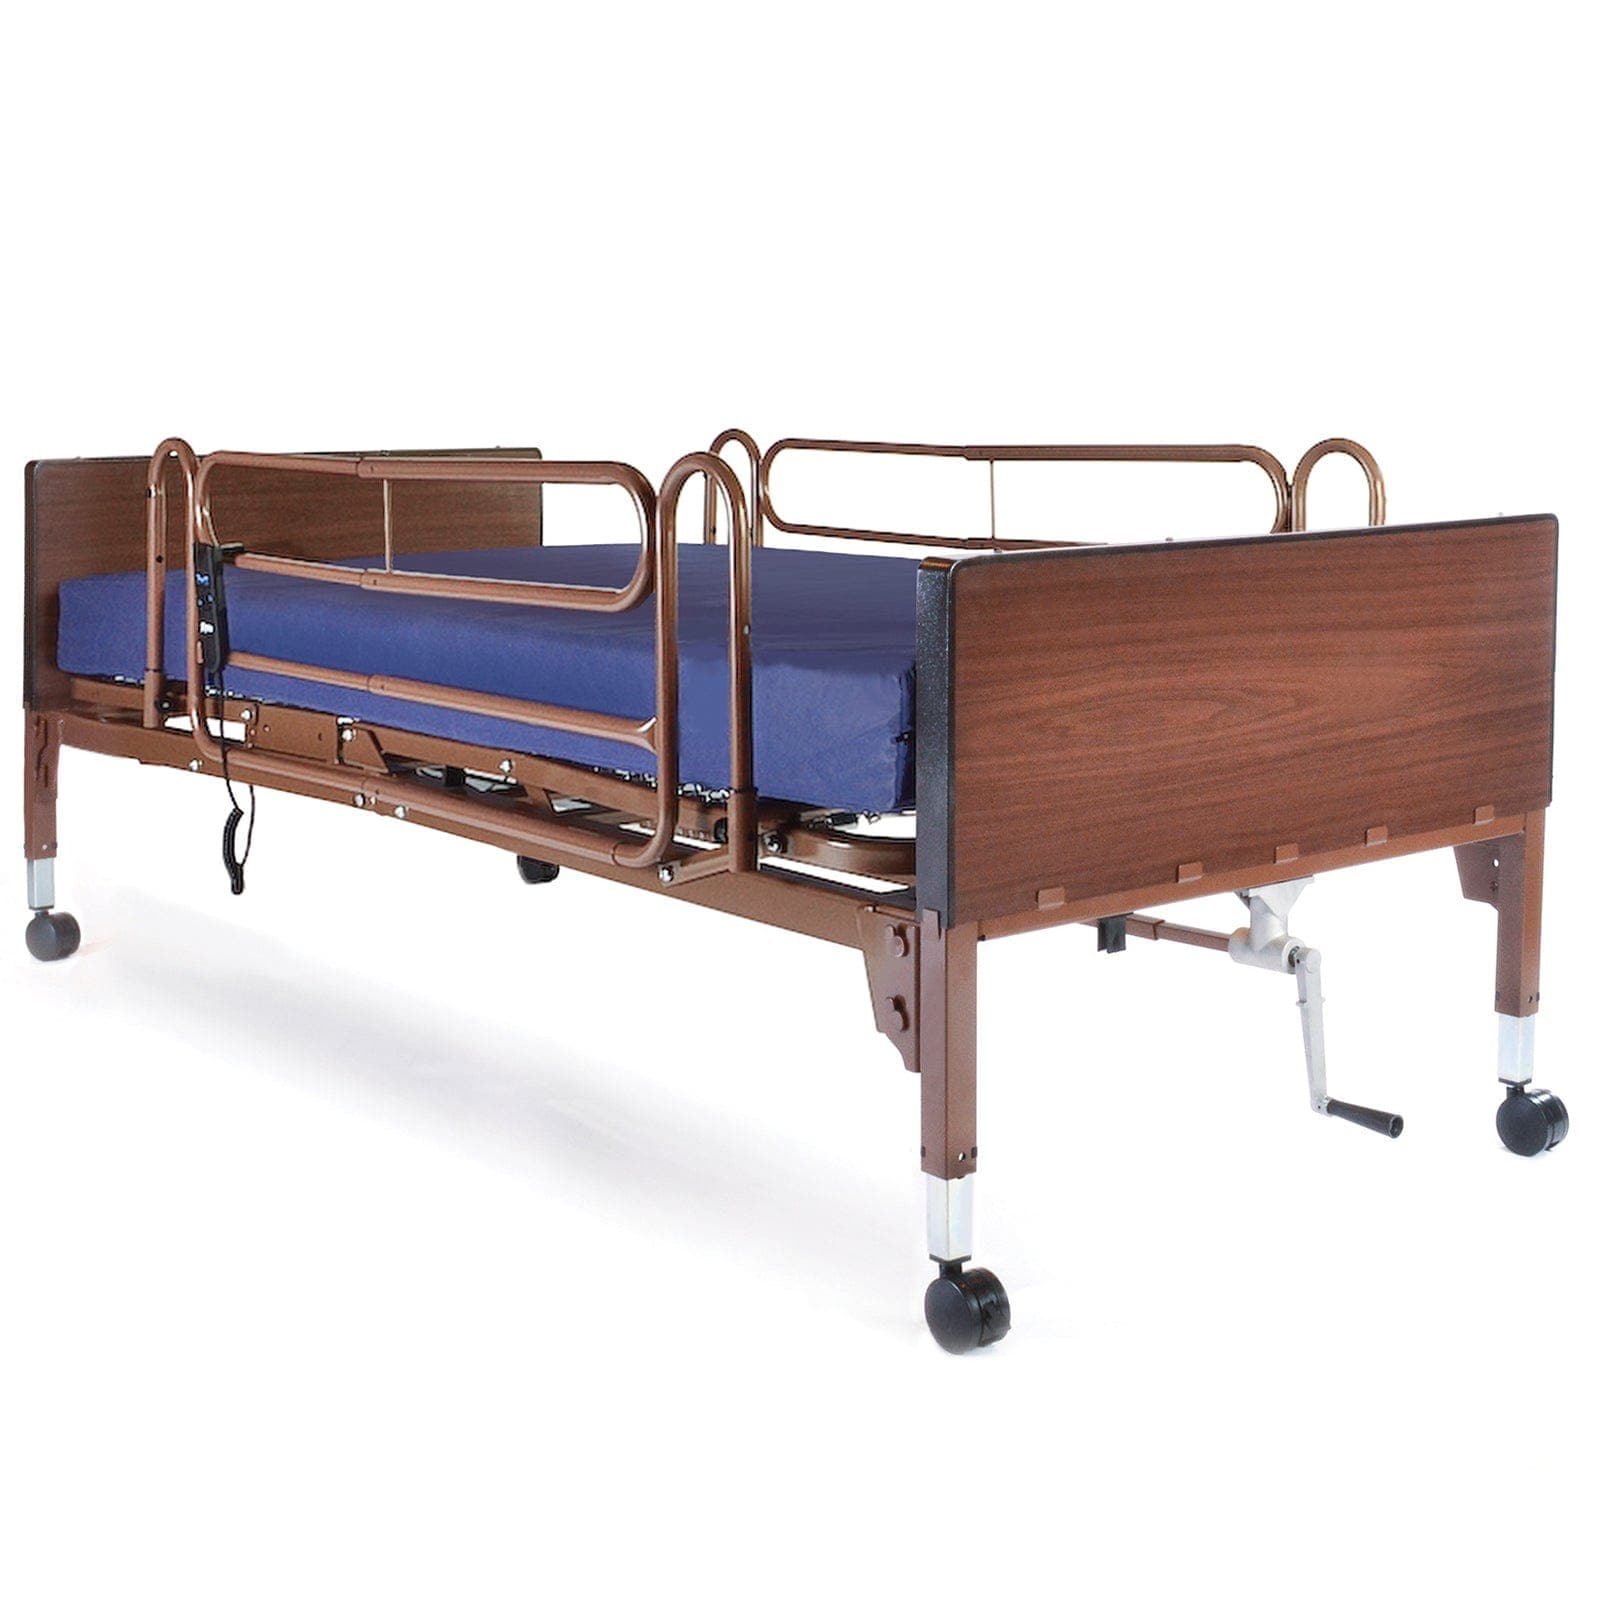 Compass Health Treatment Furniture Compass Health Probasics Single Motor Semi-Electric Lightweight Bed Package